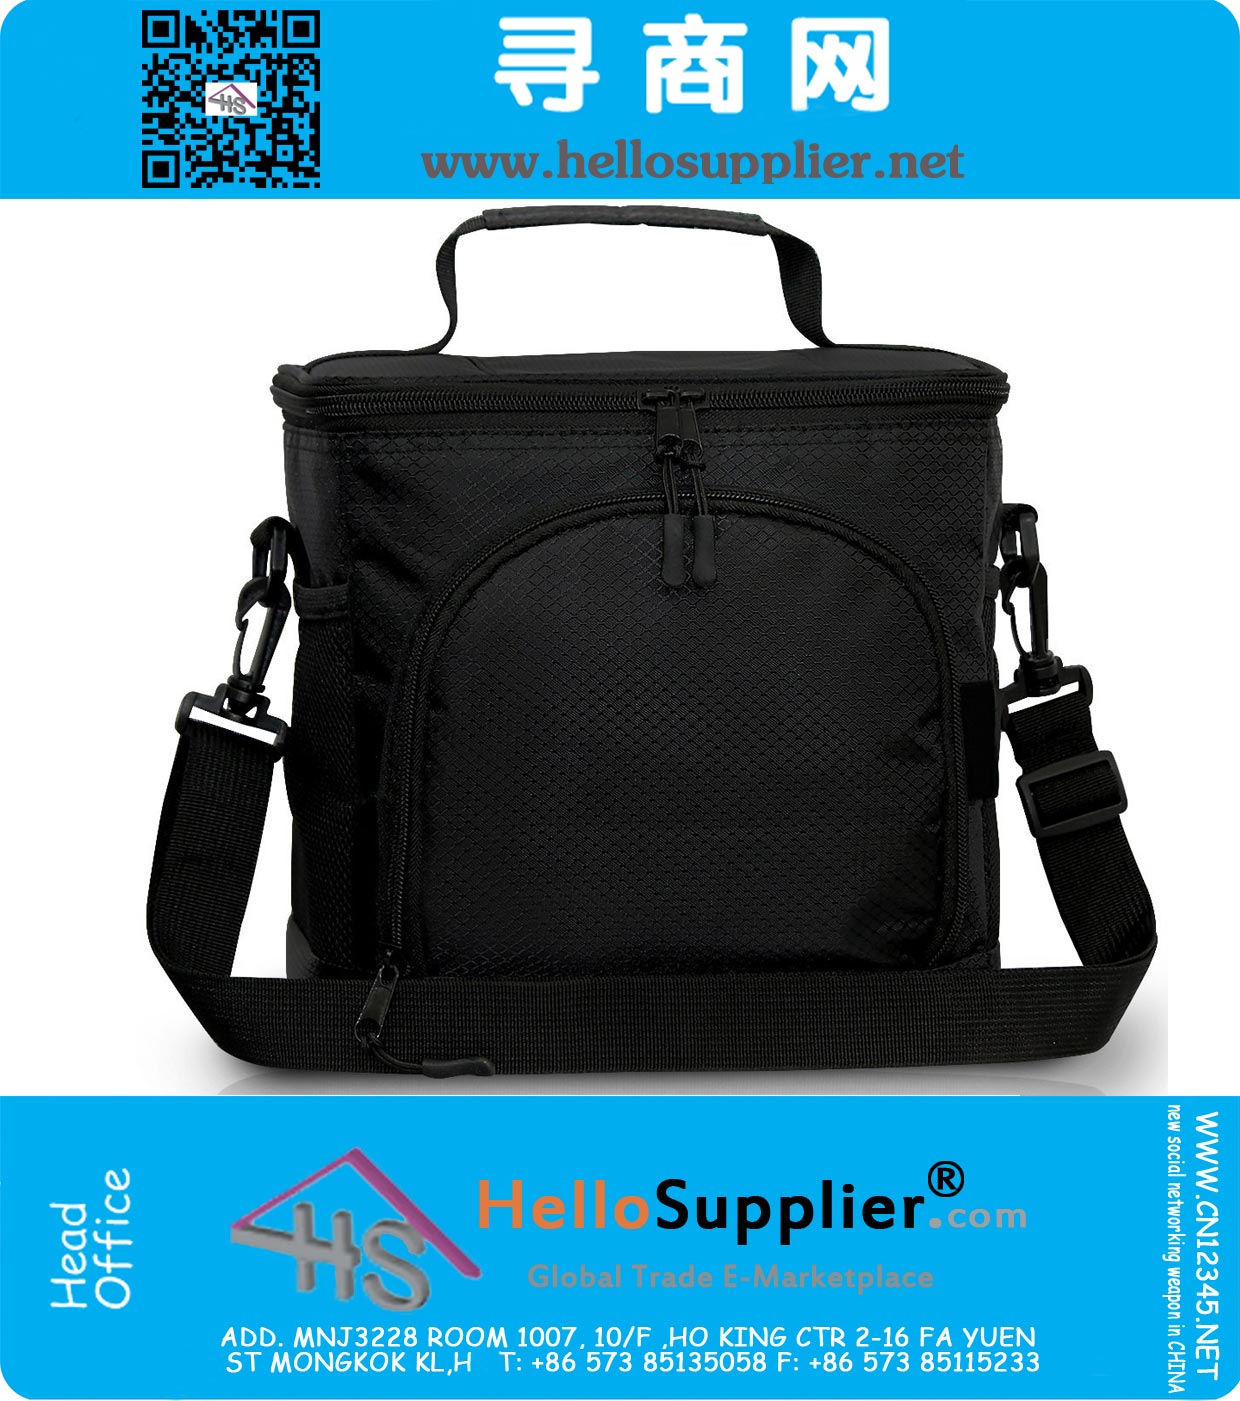 Insulated Lunch Bag with 2 Way Zipper Closures Double-sewn Nylon Large Mesh Side Pockets and 48-Inch Detachable Shoulder Strap